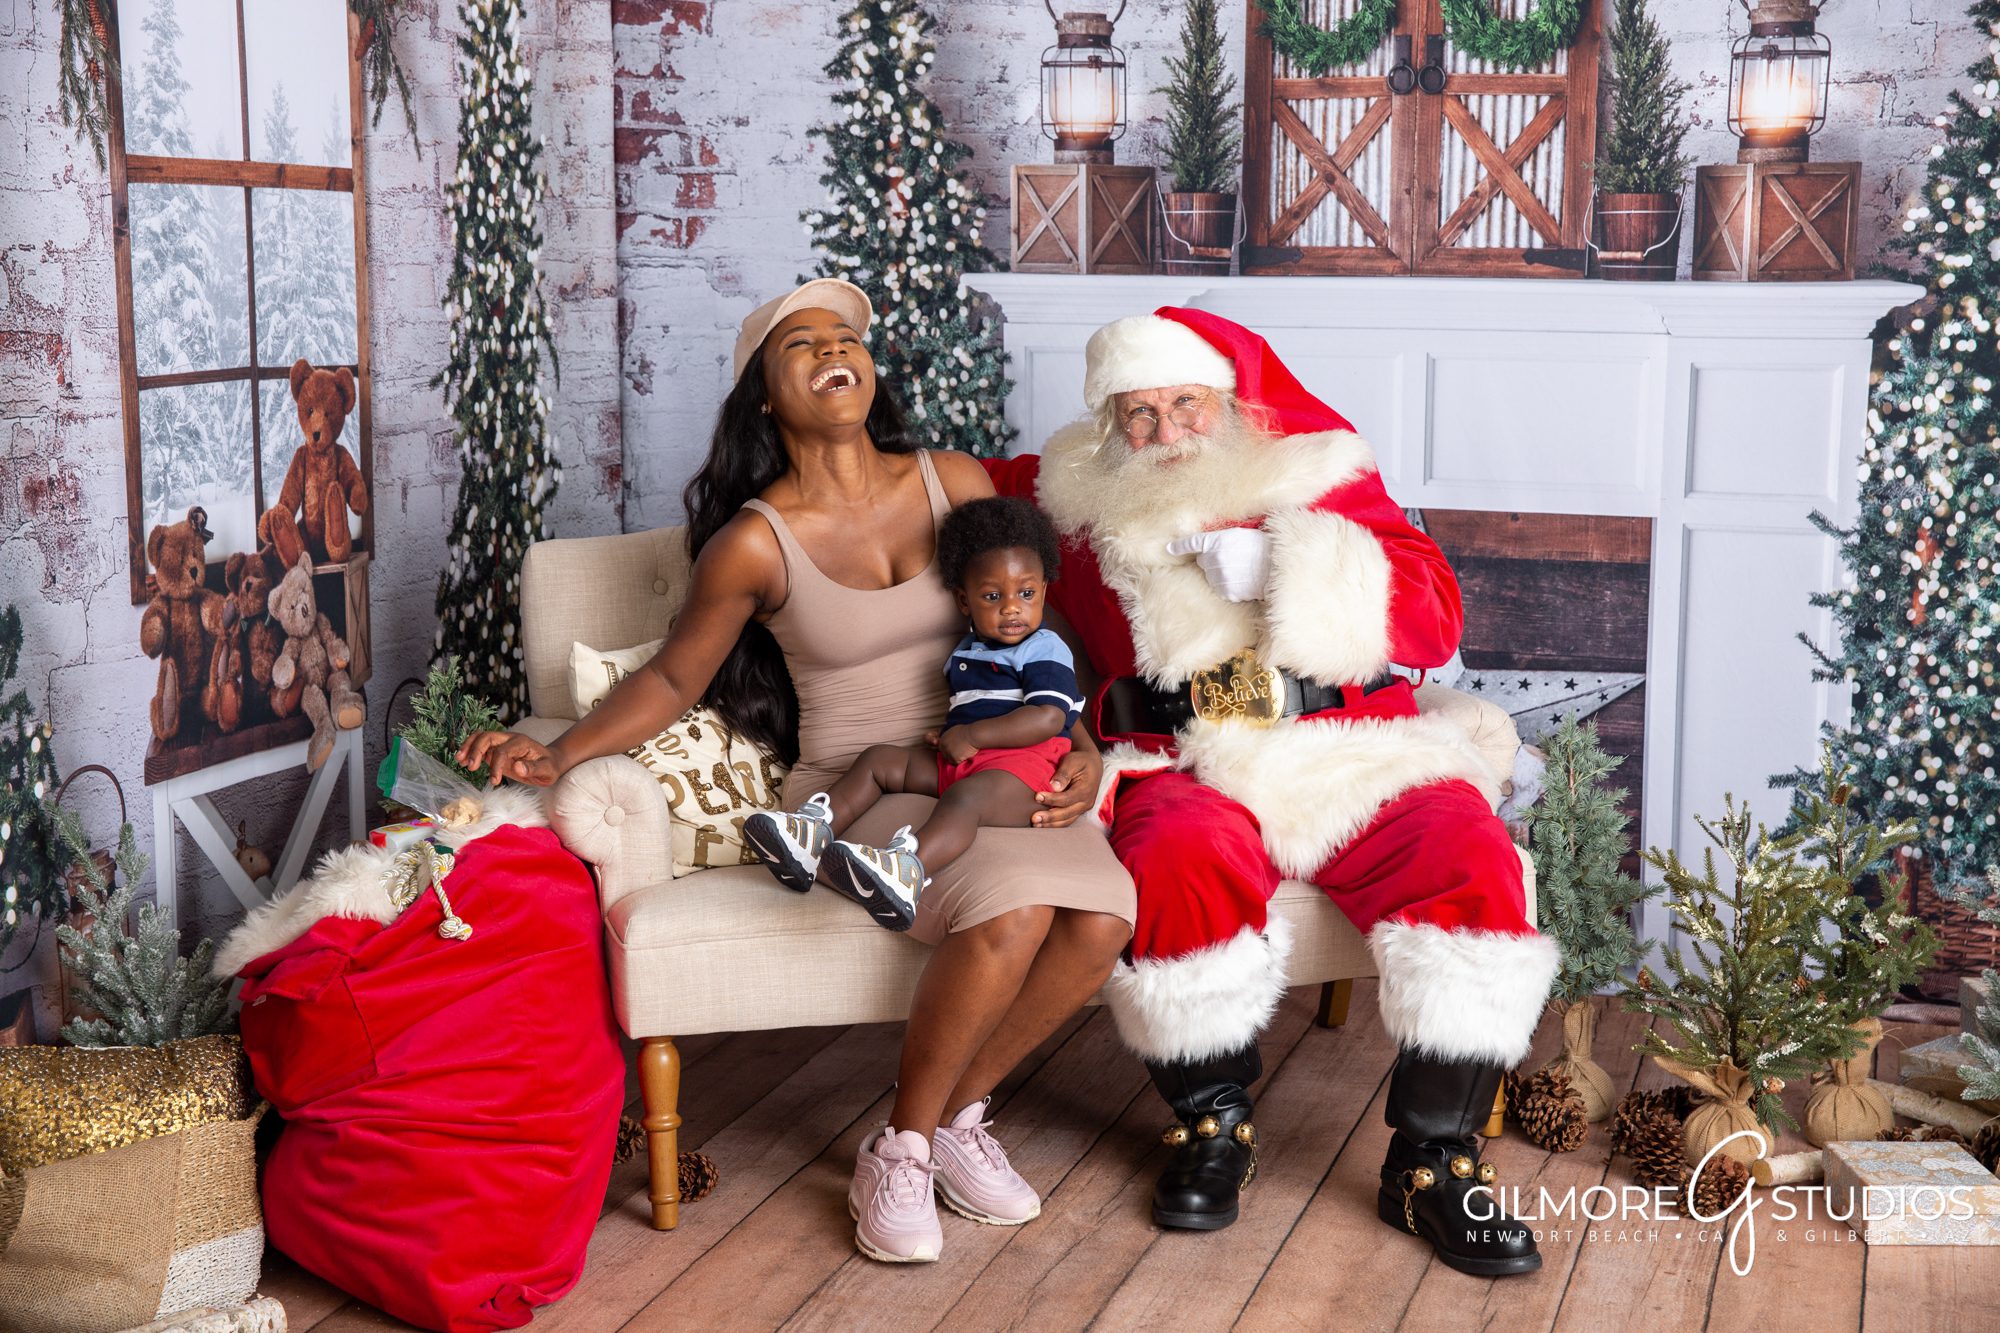 Santa Experience mini session - Gilbert, AZ - Newport Beach, CA - Christmas minis - Santa's Workshop - Santa Claus photography, Kids, children, Jolly, Ho, Ho, Ho, photo shoot, photographer, Gilmore Studios, Candy Cane Lane, Santa Claus, Christmas, Holiday, Winter Wonderland, Merry and Bright, Stockings, North Pole, Christmas Tree, Cookies and Milk, Red and White, Reindeer, Laughter, Naughty or Nice, Ornaments, Sleigh, Santa's Helpers, Santa Hat, Christmas Tree, Snowflakes, Sleigh Bells, Wreaths, Icicles, Twinkling Lights, Joy, Family, Presents, Festive Attire, Holly and Ivy